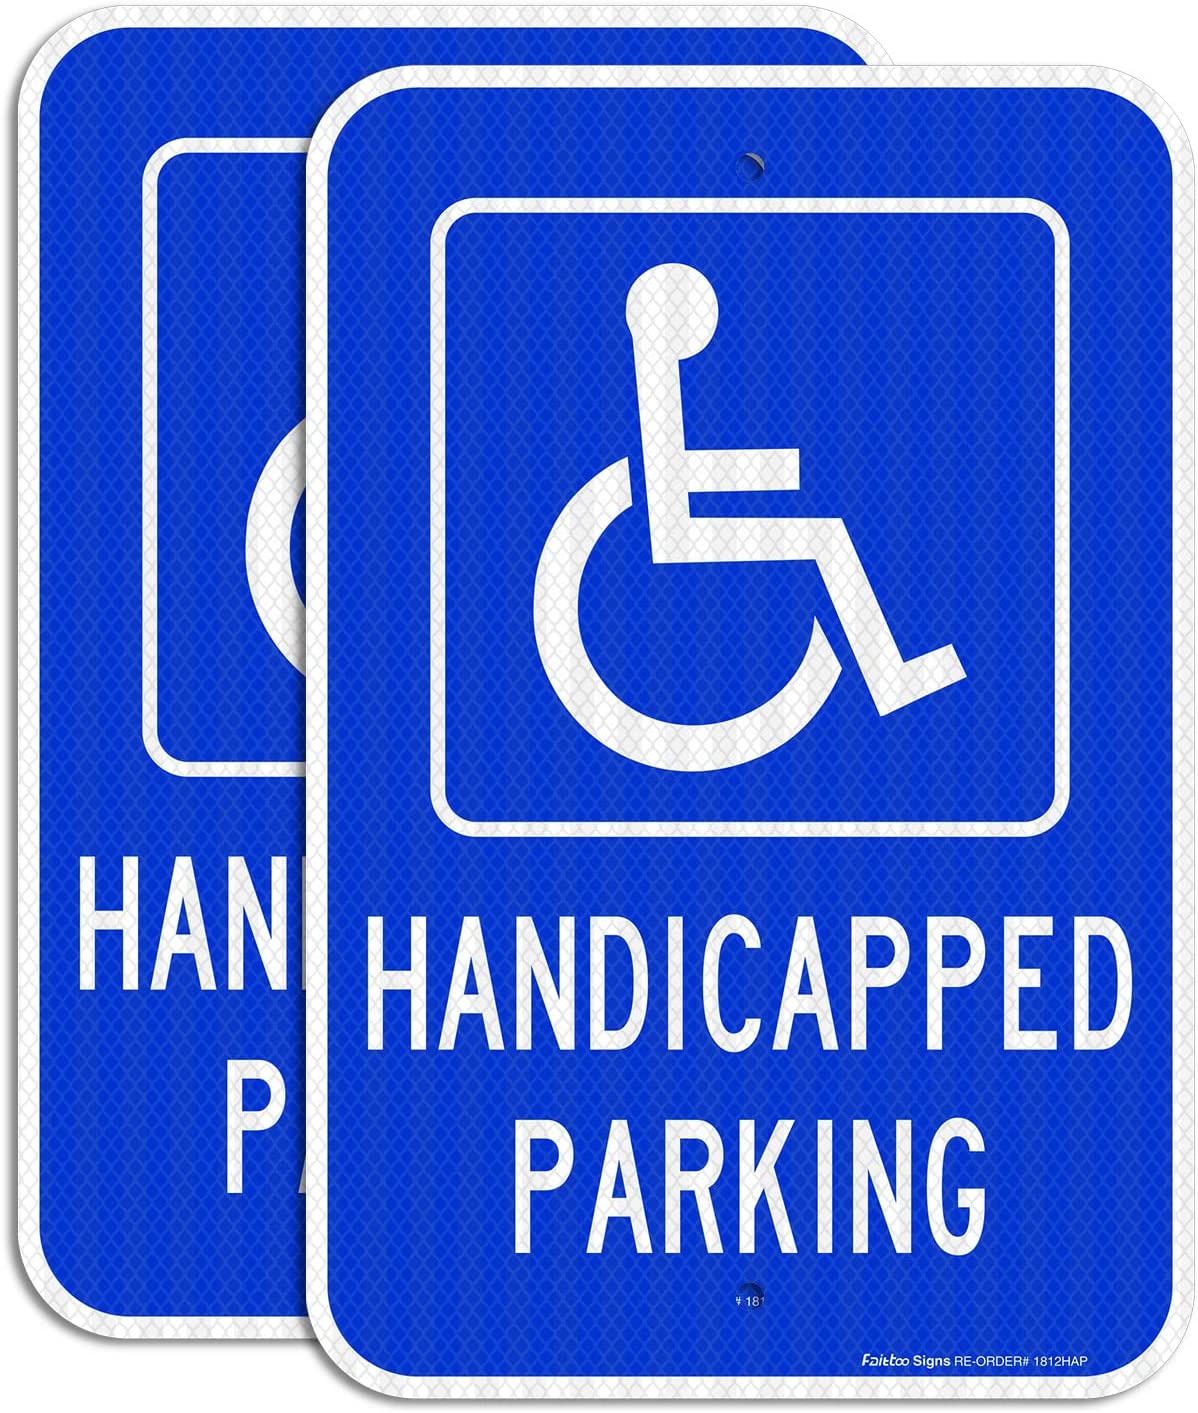 Handicap Parking Sign, with Picture of Wheelchair Sign, 18 x 12 Inches Engineer Grade Reflective Sheeting Rust Free Aluminum, Weather Resistant, Waterproof, Durable Ink, Easy to Mount